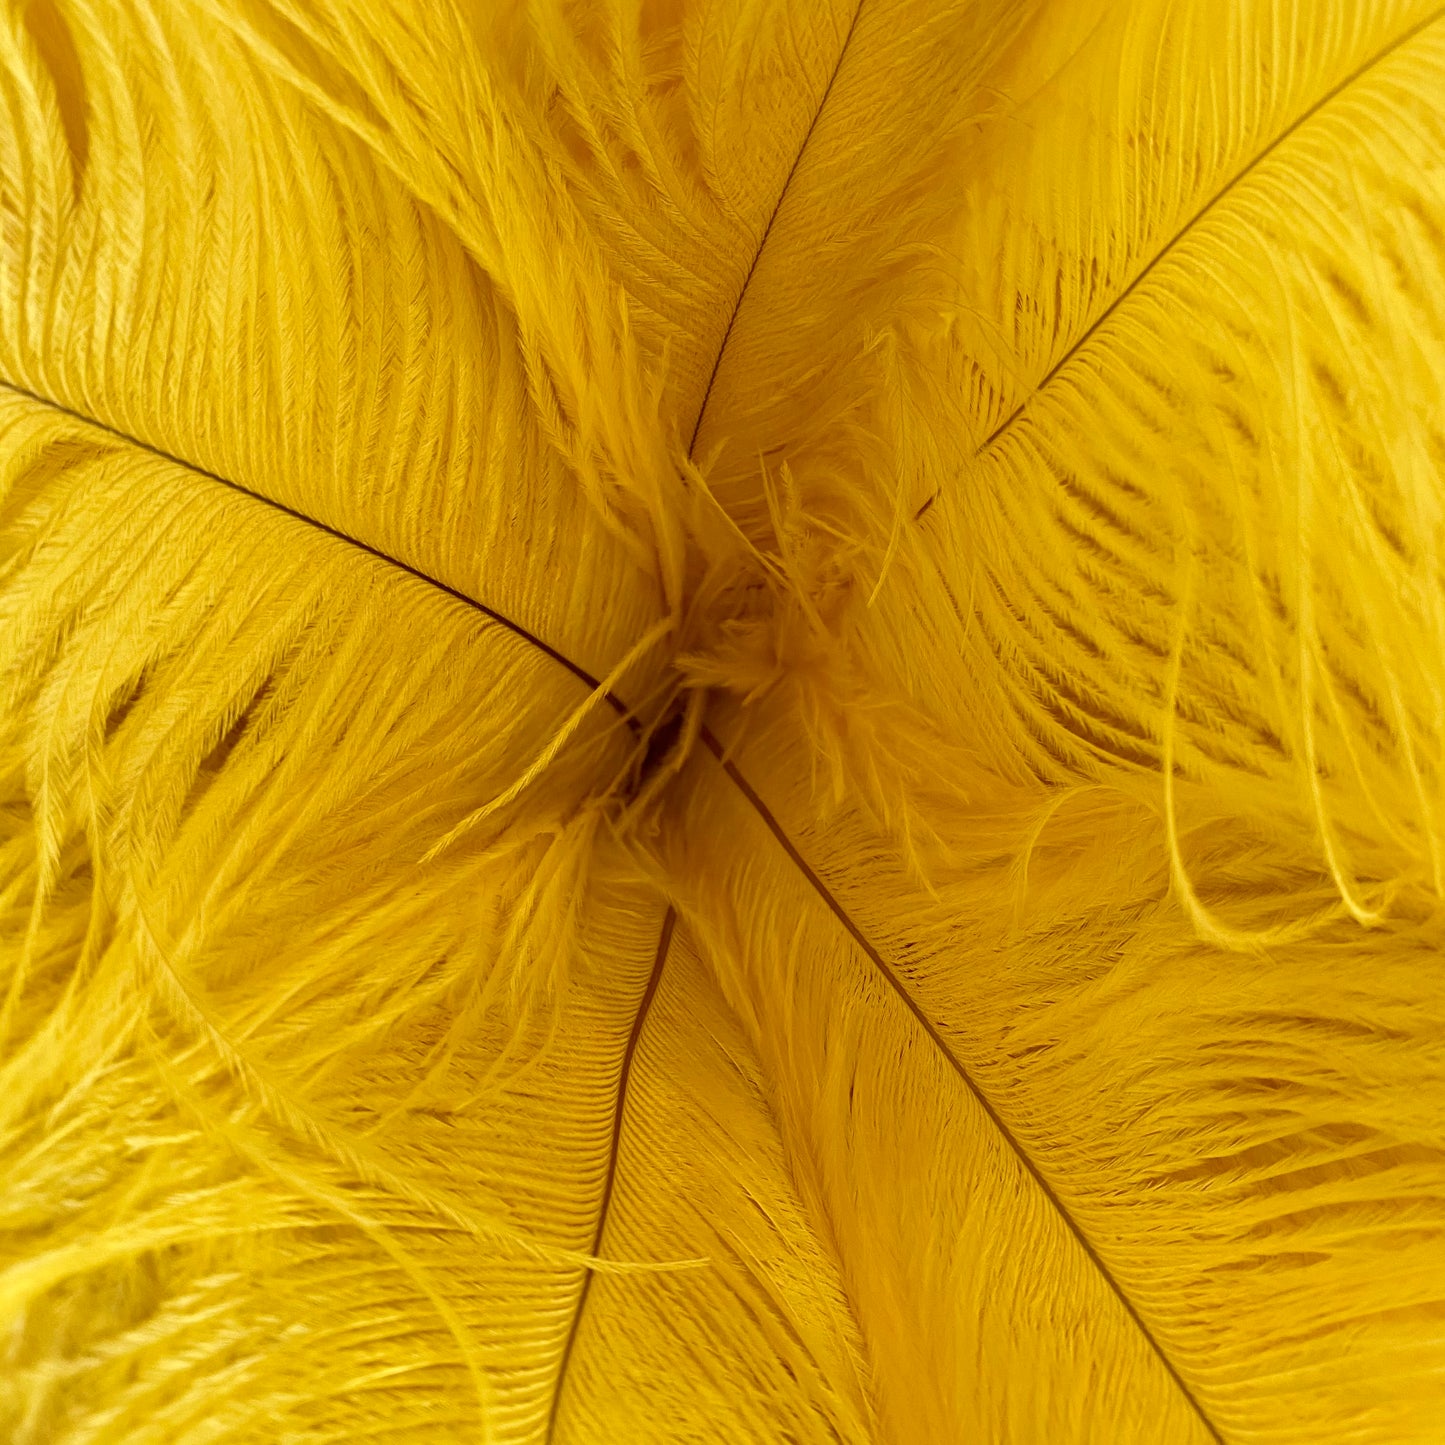 Yellow ostrich feathers